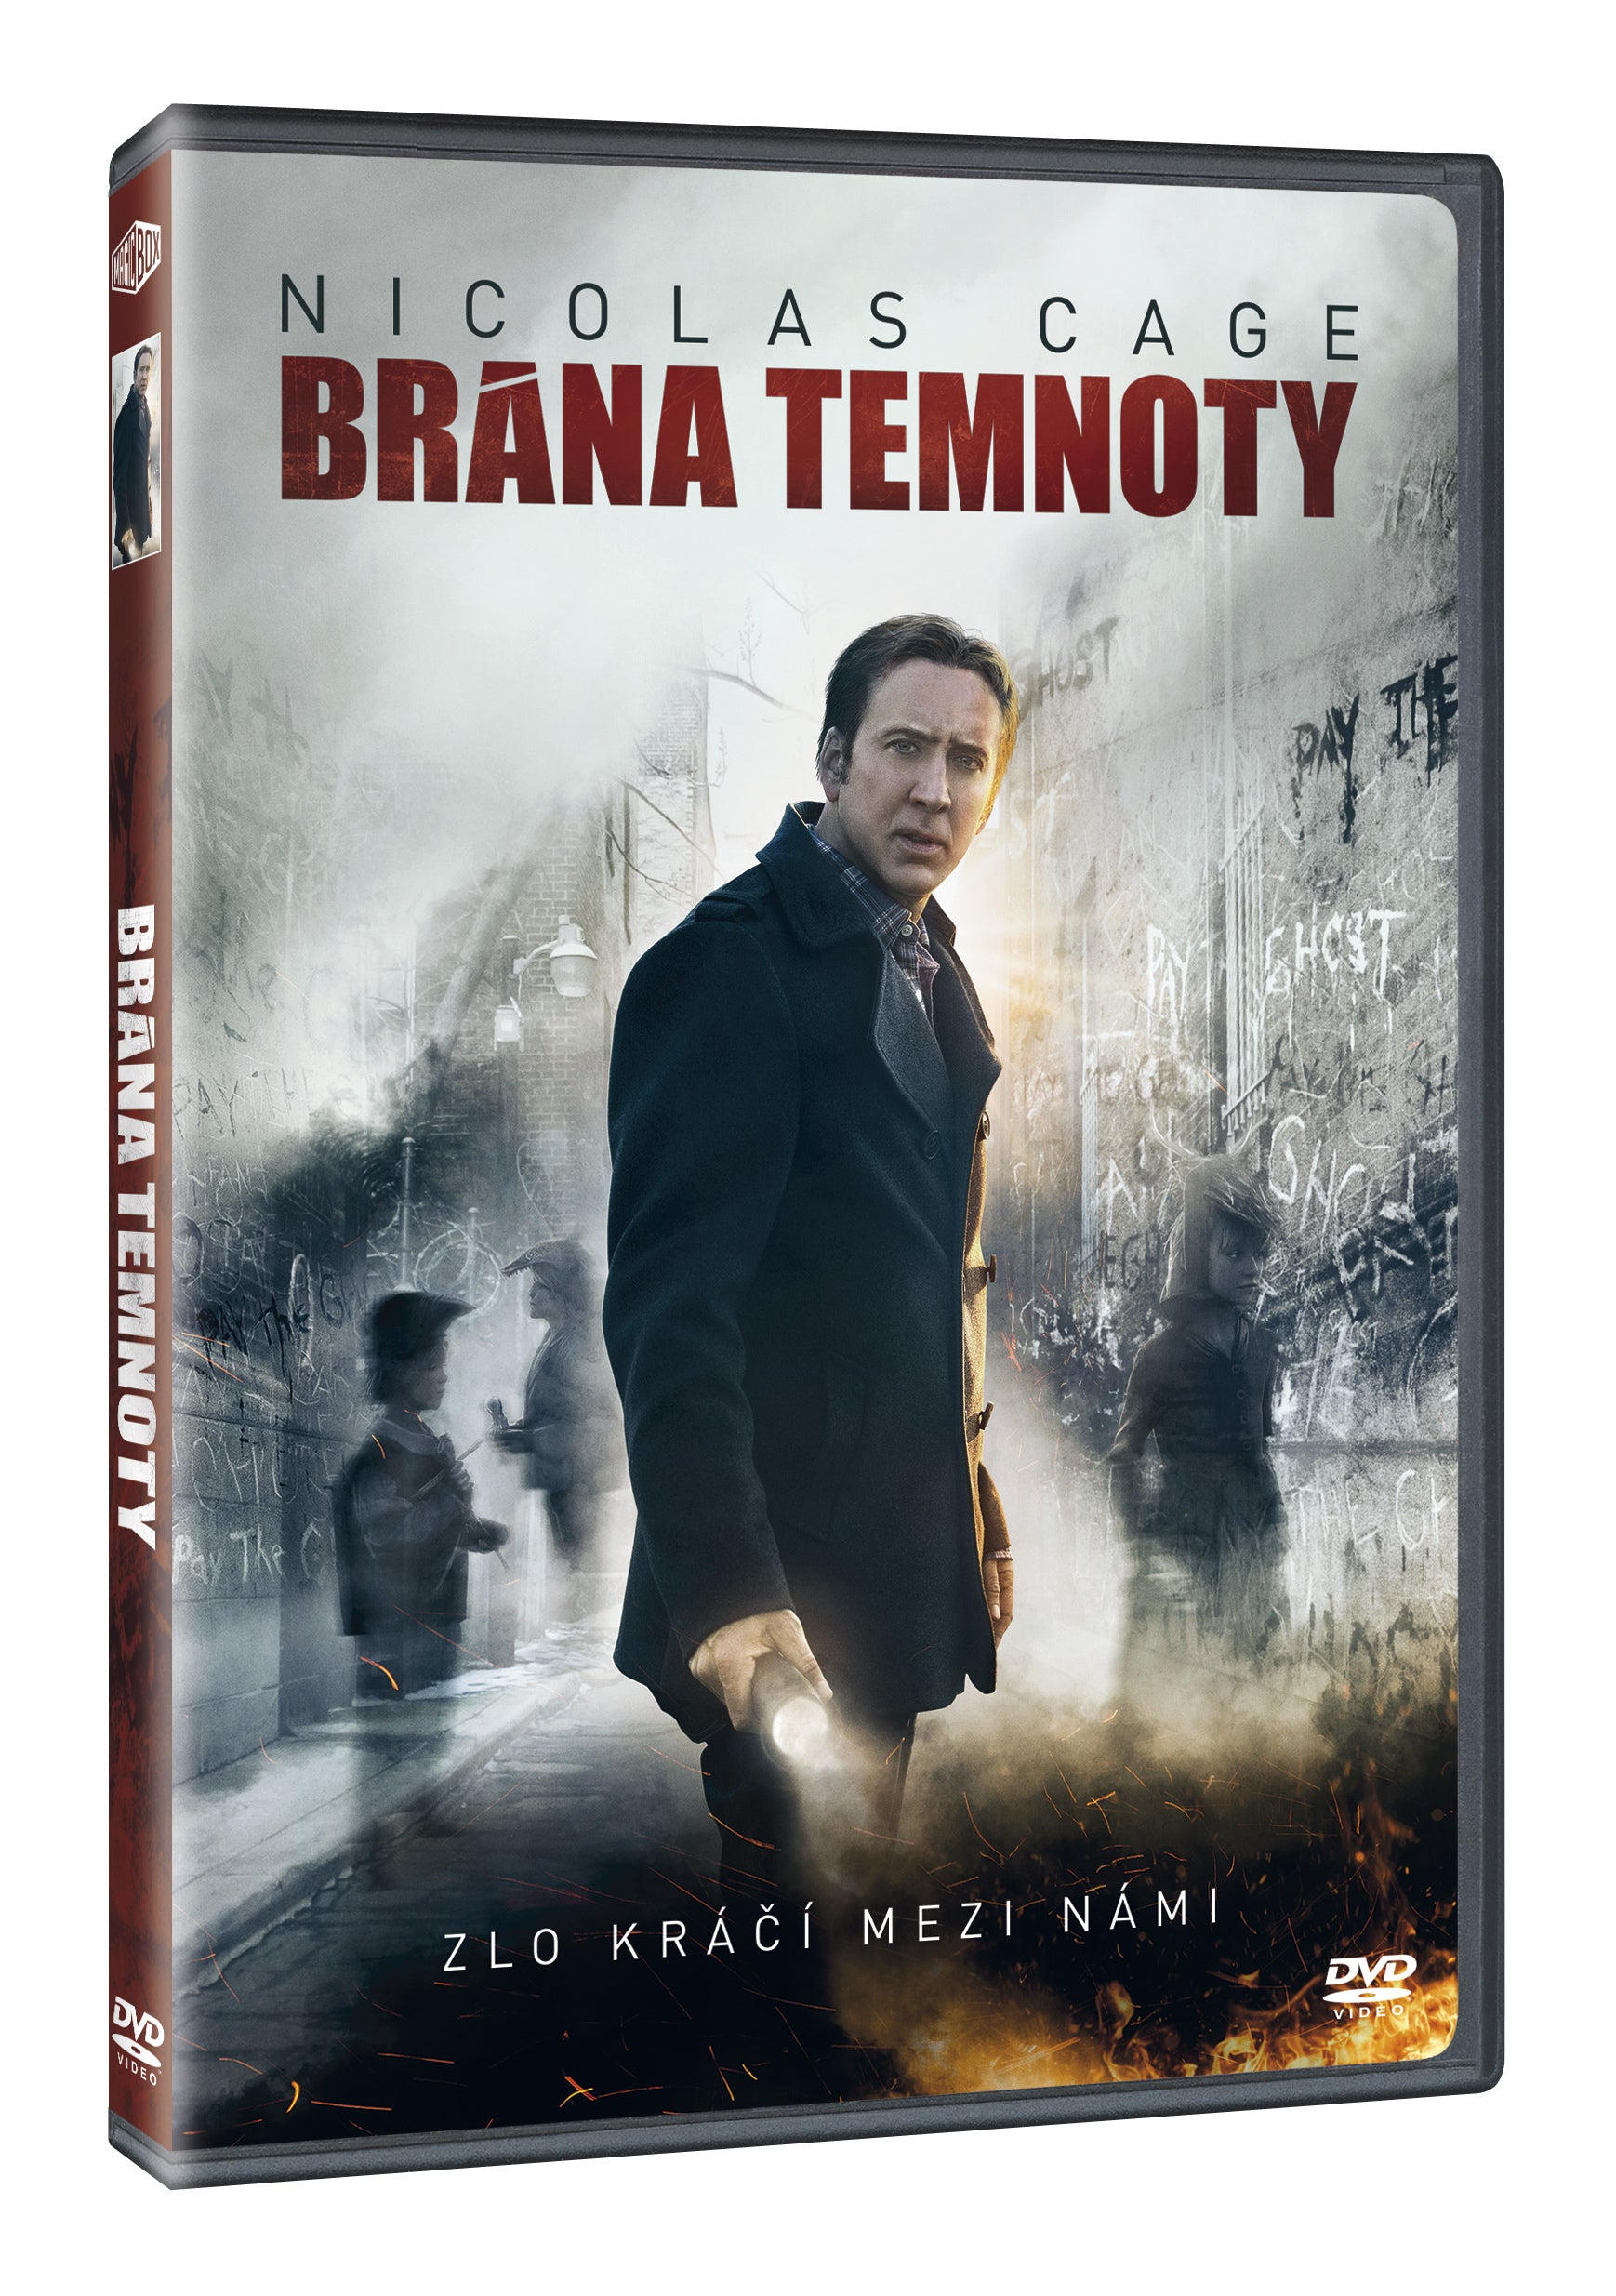 Brana temnoty DVD / Pay the Ghost